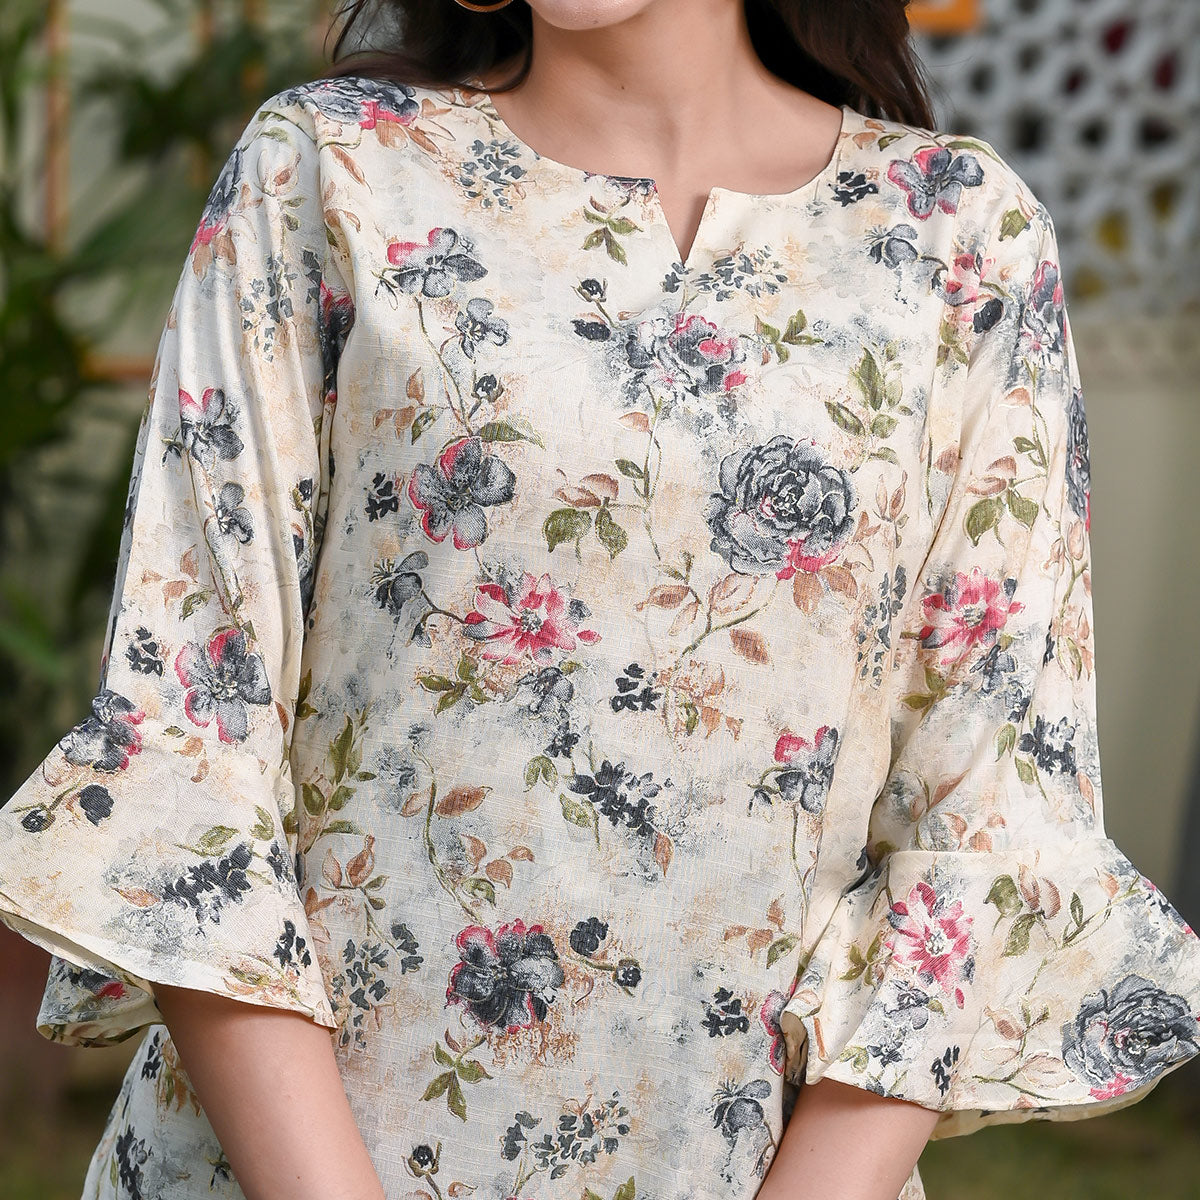 White & Grey Floral Printed Rayon Top